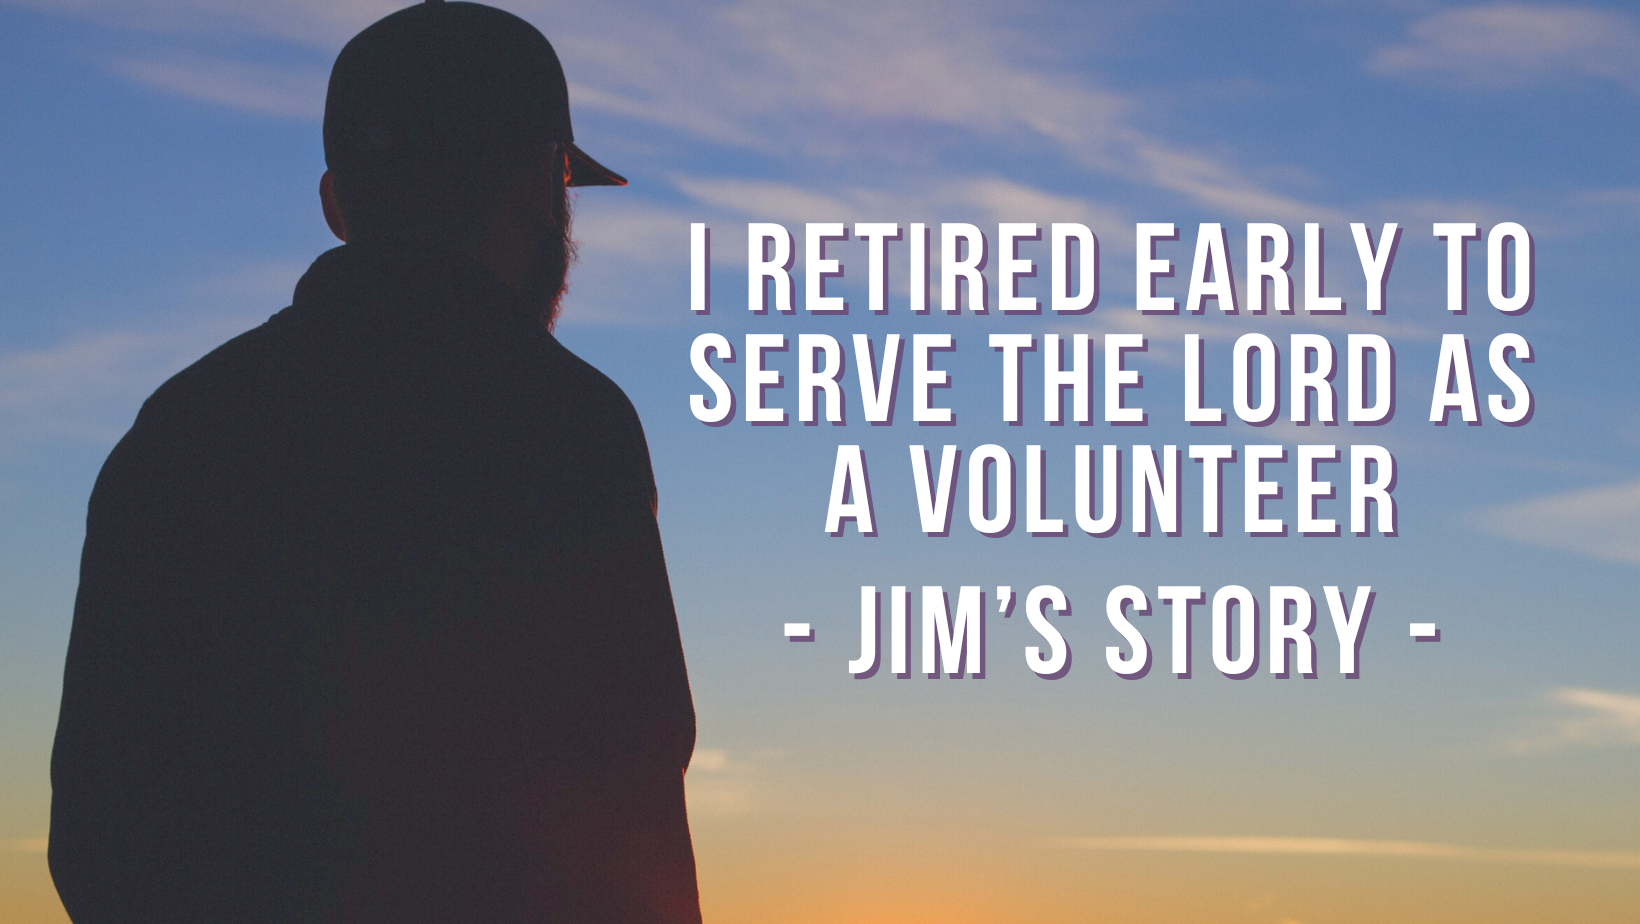 I retired early to serve the Lord as a volunteer - Jim’s story